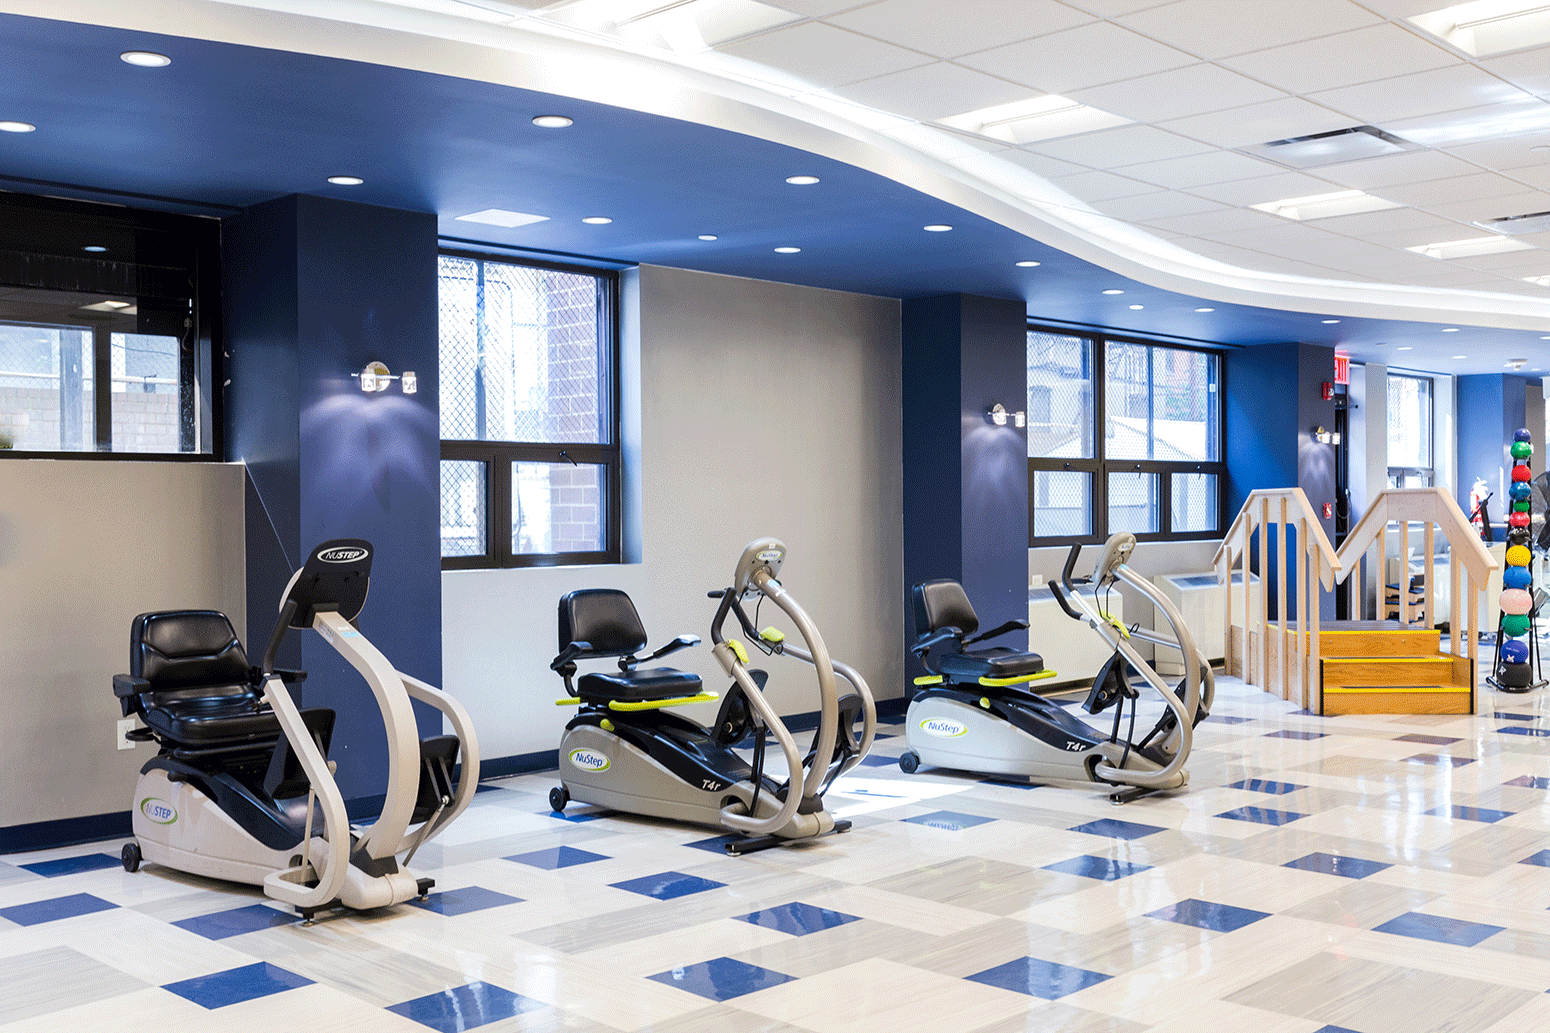 State-of-the-art gym and equipment